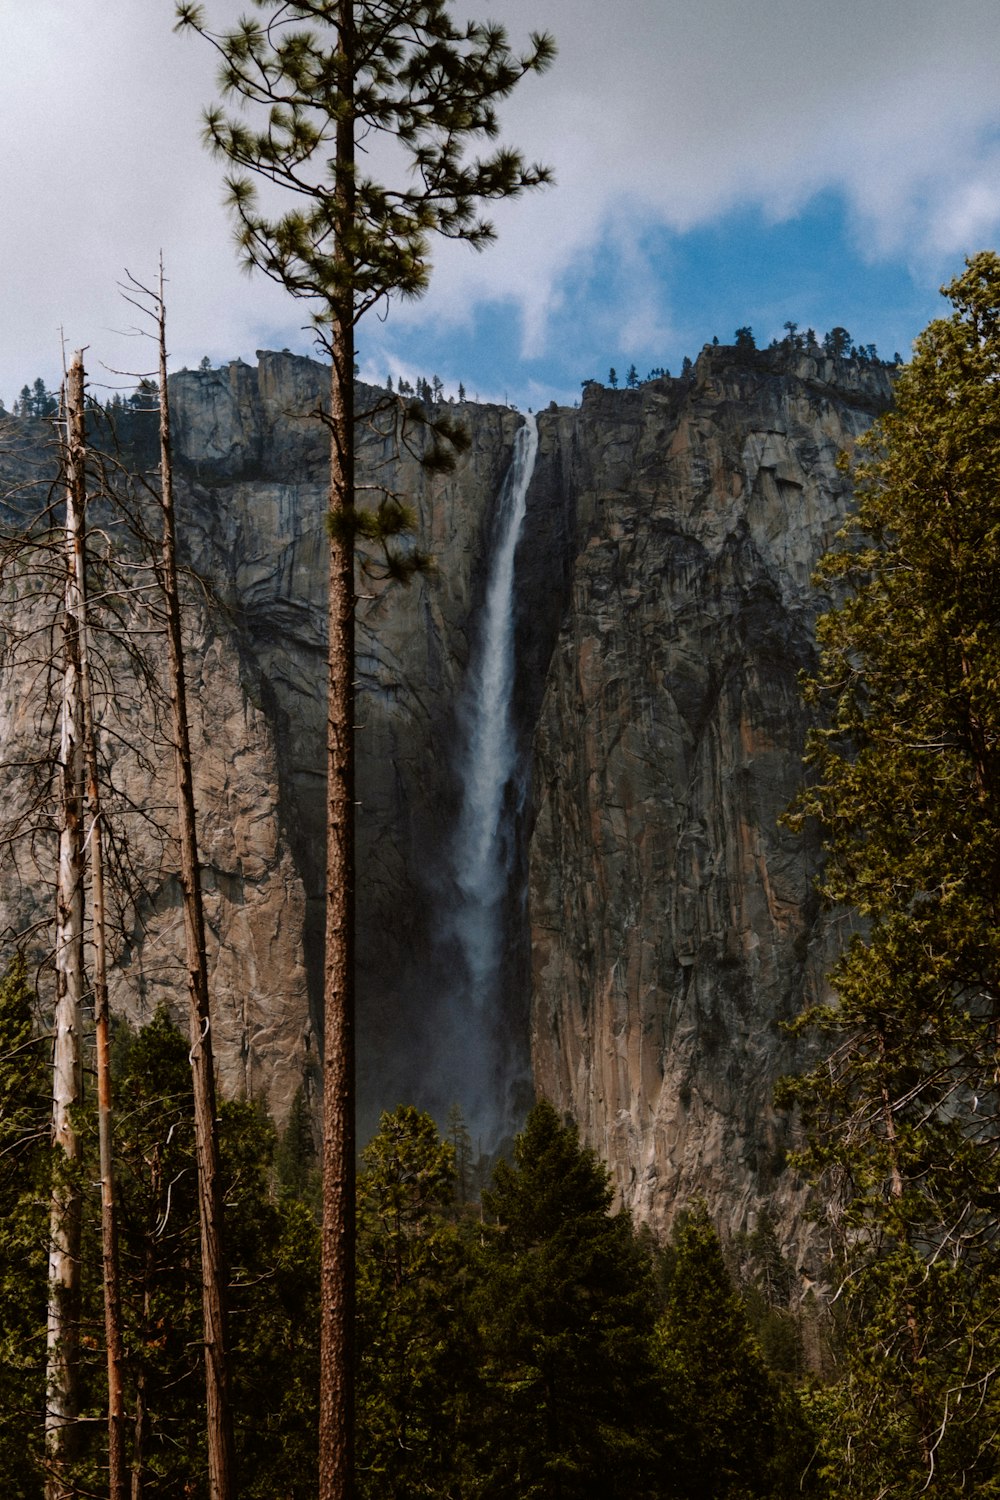 a tall waterfall towering over a forest filled with trees